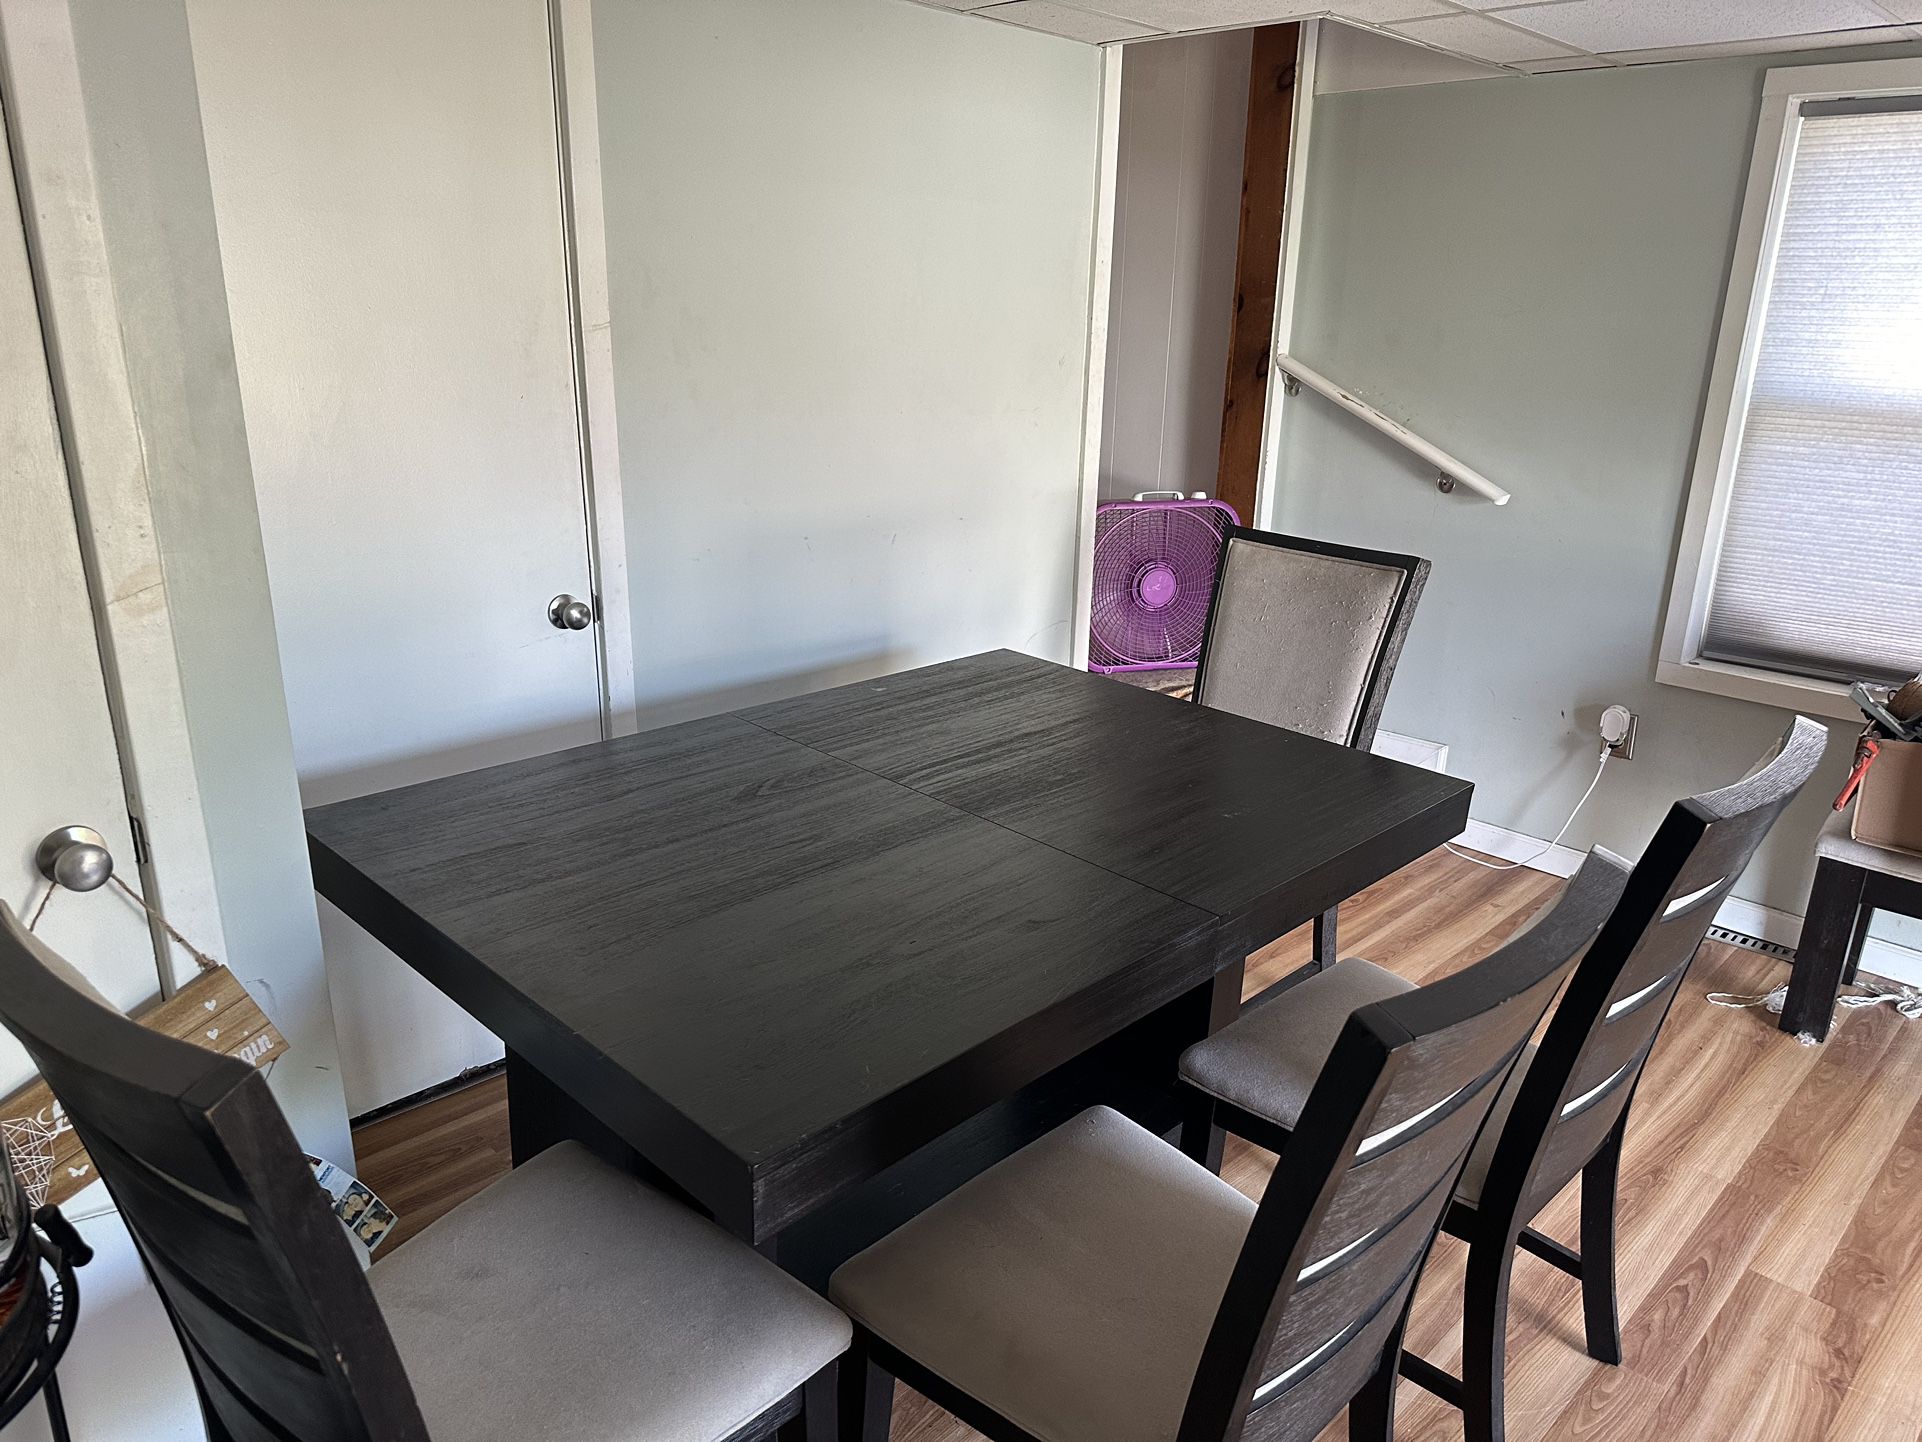 Dining Room Table  (obo) 